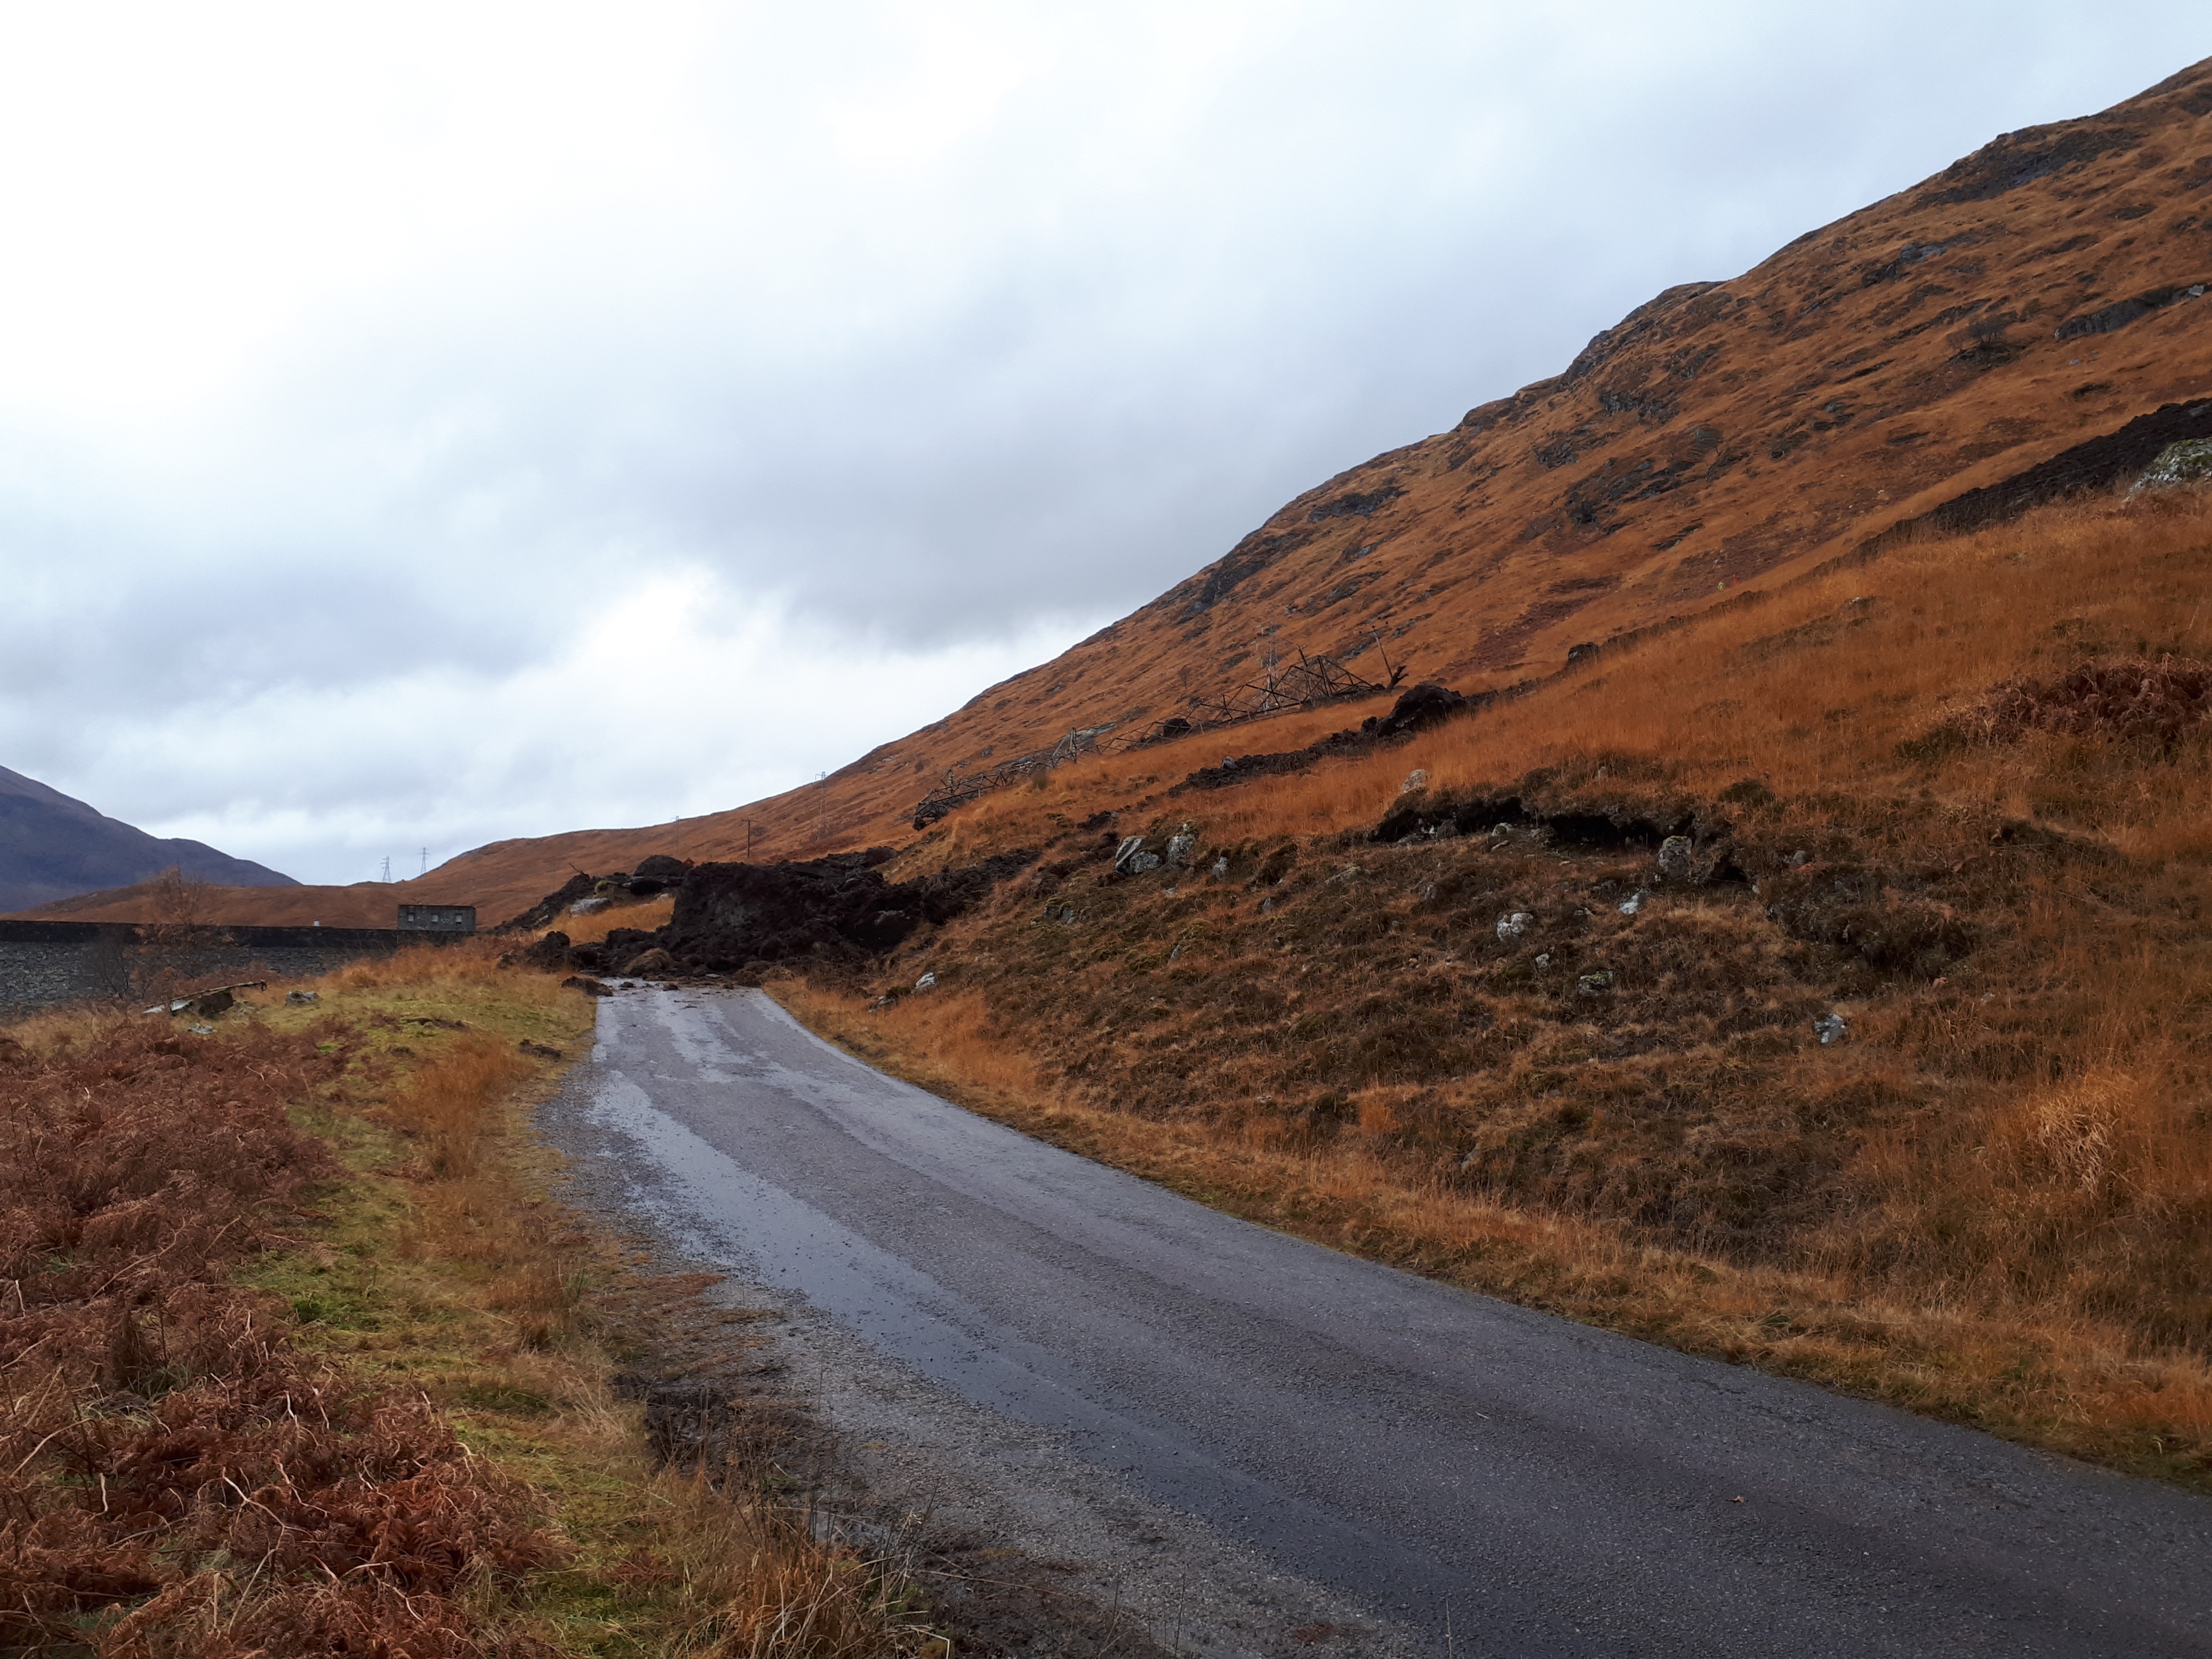 A landslide near to Invergary caused the power outage to 23,000 customers in the Western Isles and Skye.